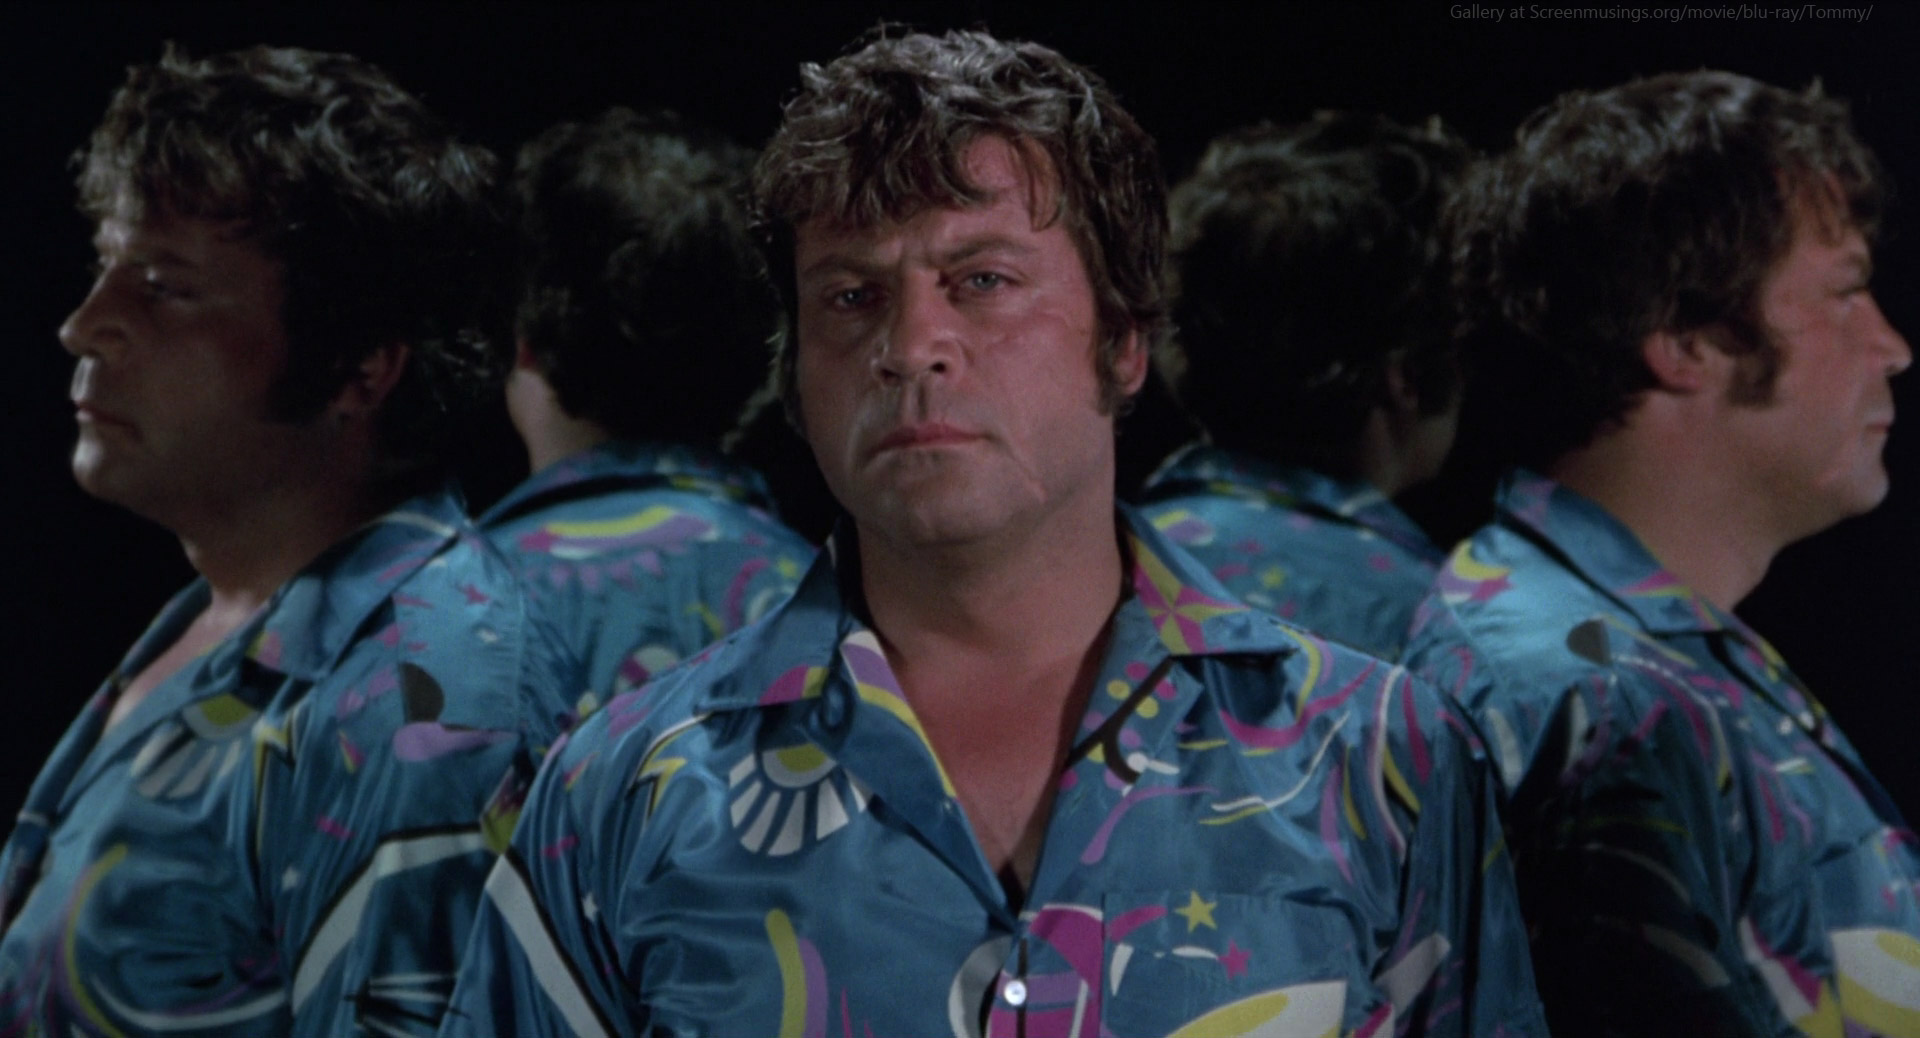 Oliver Reed in Tommy